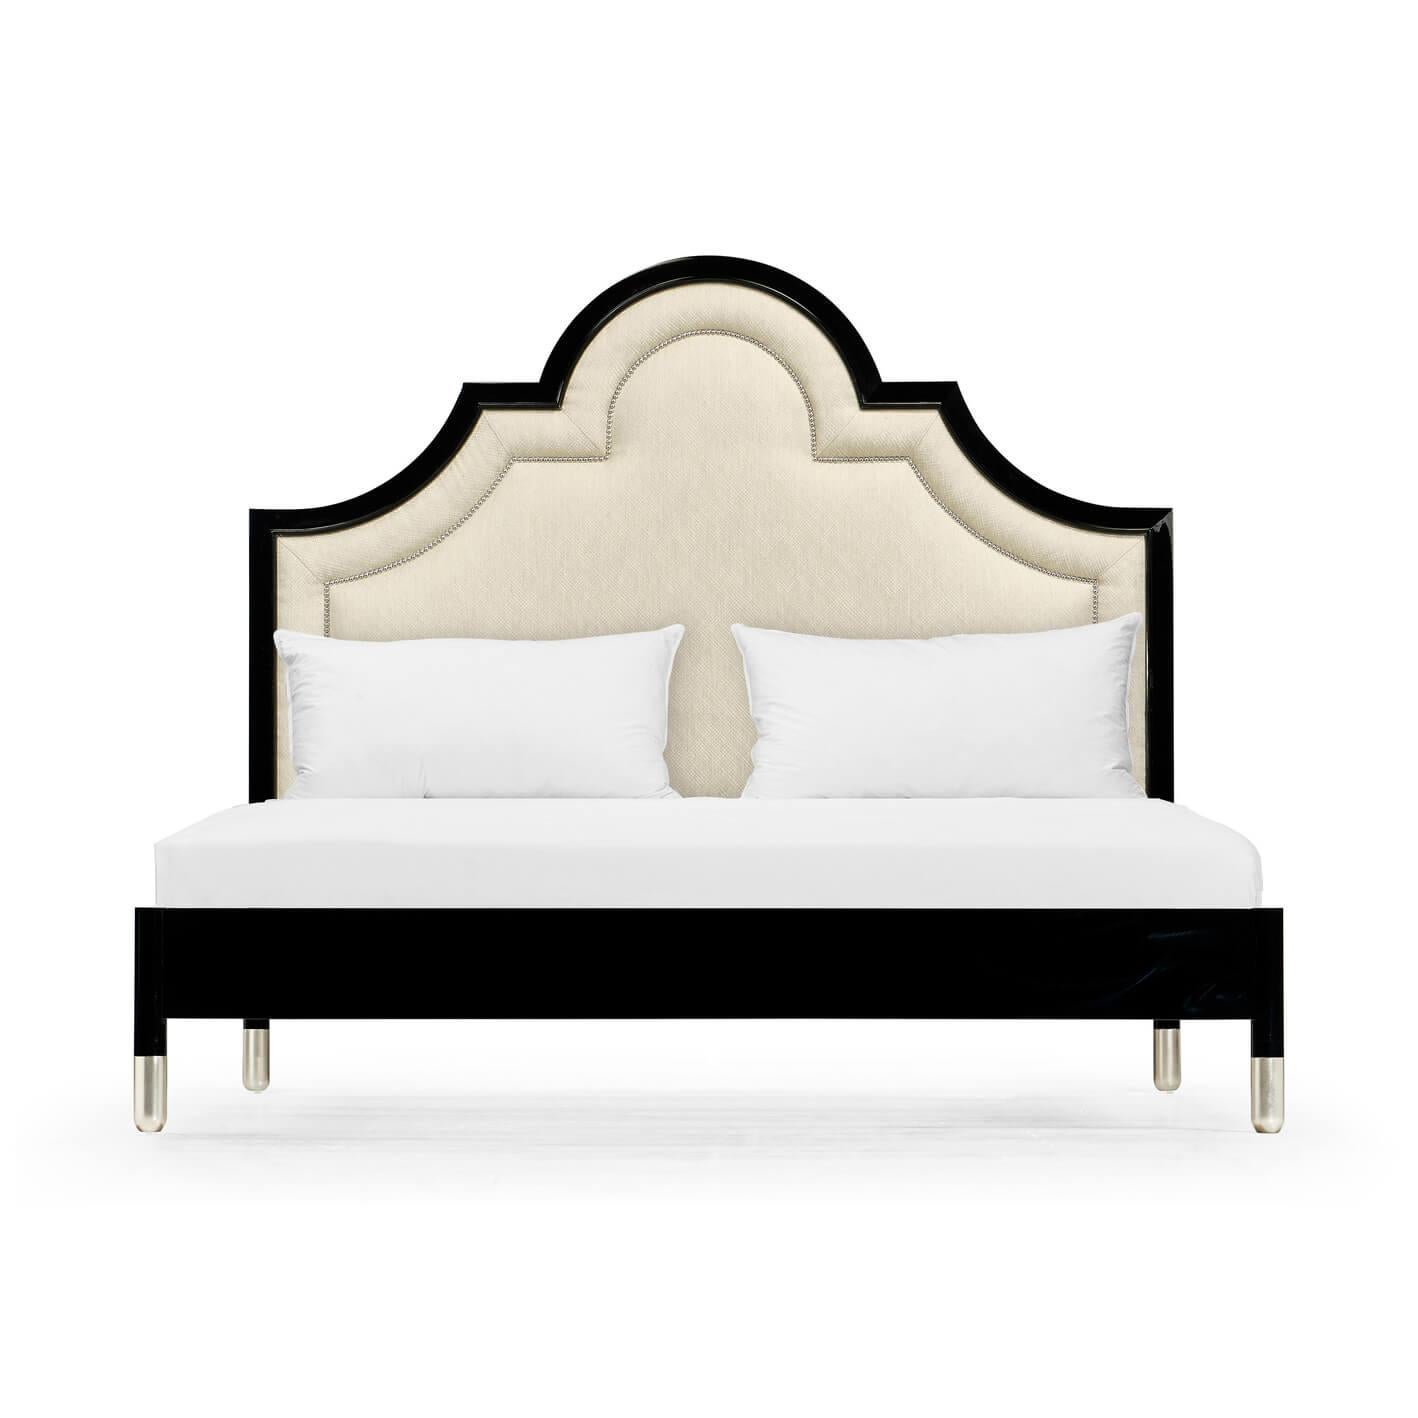 A Mid-Century Modern style black lacquered king size bed. The piano black polished finish to the arched and upholstered headboard with nickel-plated nailhead trim, above a lacquered frame.

Dimensions: 81.5